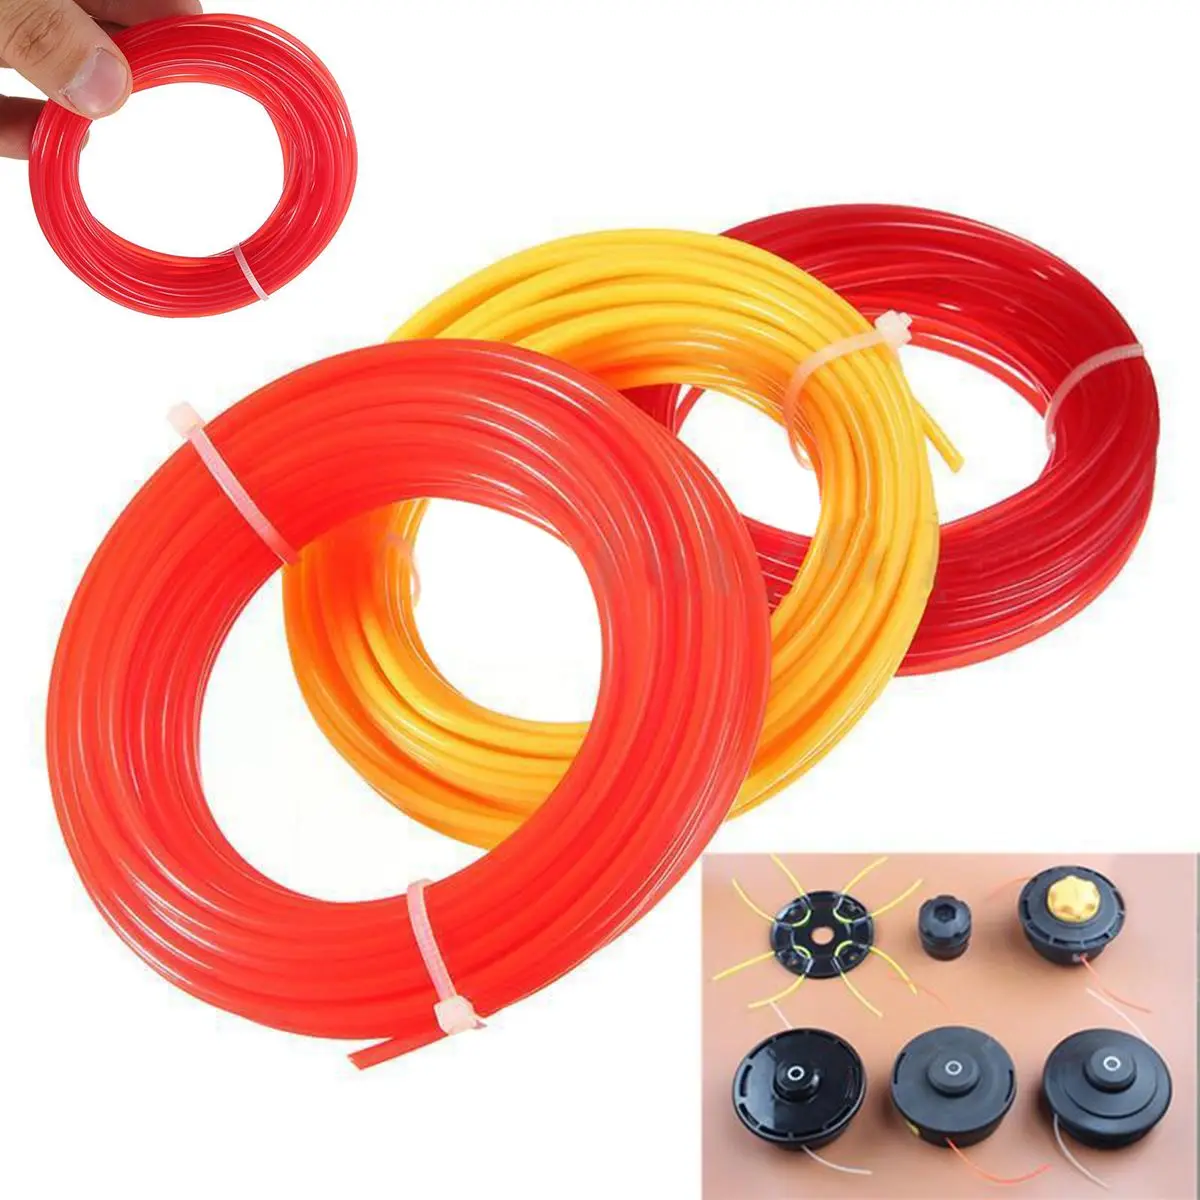 10mx2mm Nylon Cord Wire Strimmer Line Spool String Grass Trimmer Red Accessory 